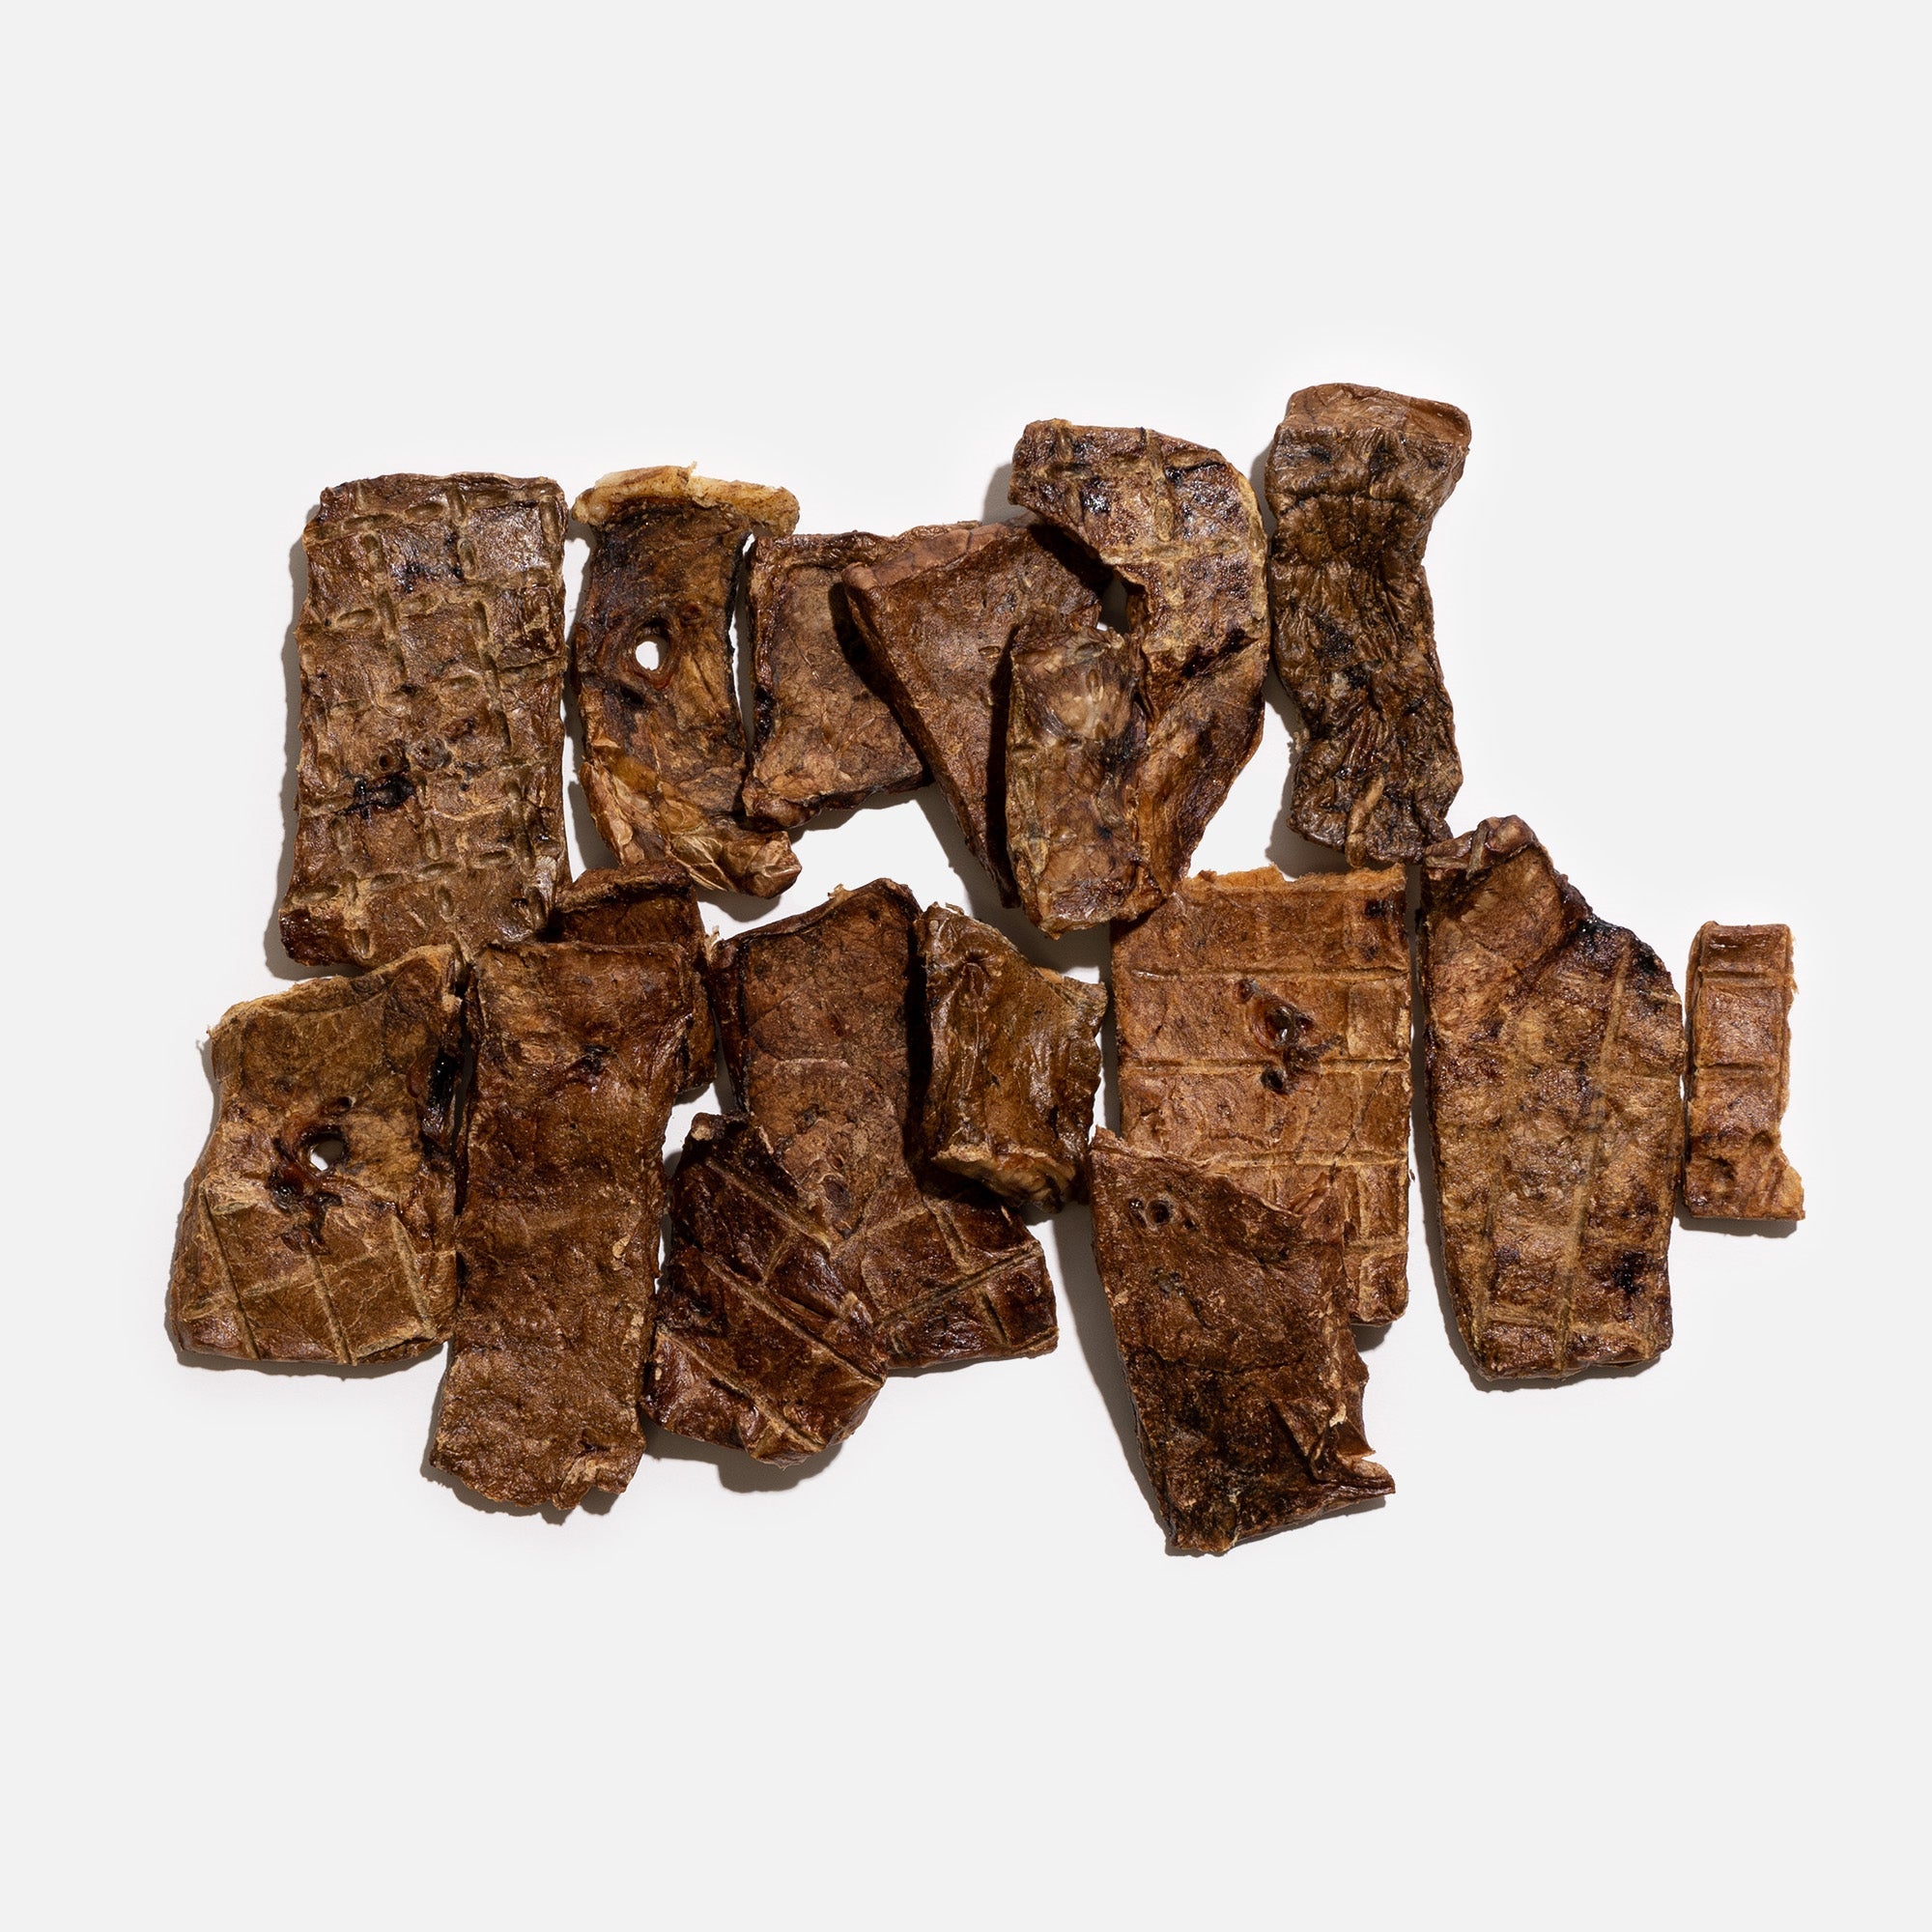 Dr. Kelly The Vet 100% Natural Beef Treats for Dogs - Healthy and satisfying snacks for your pet.